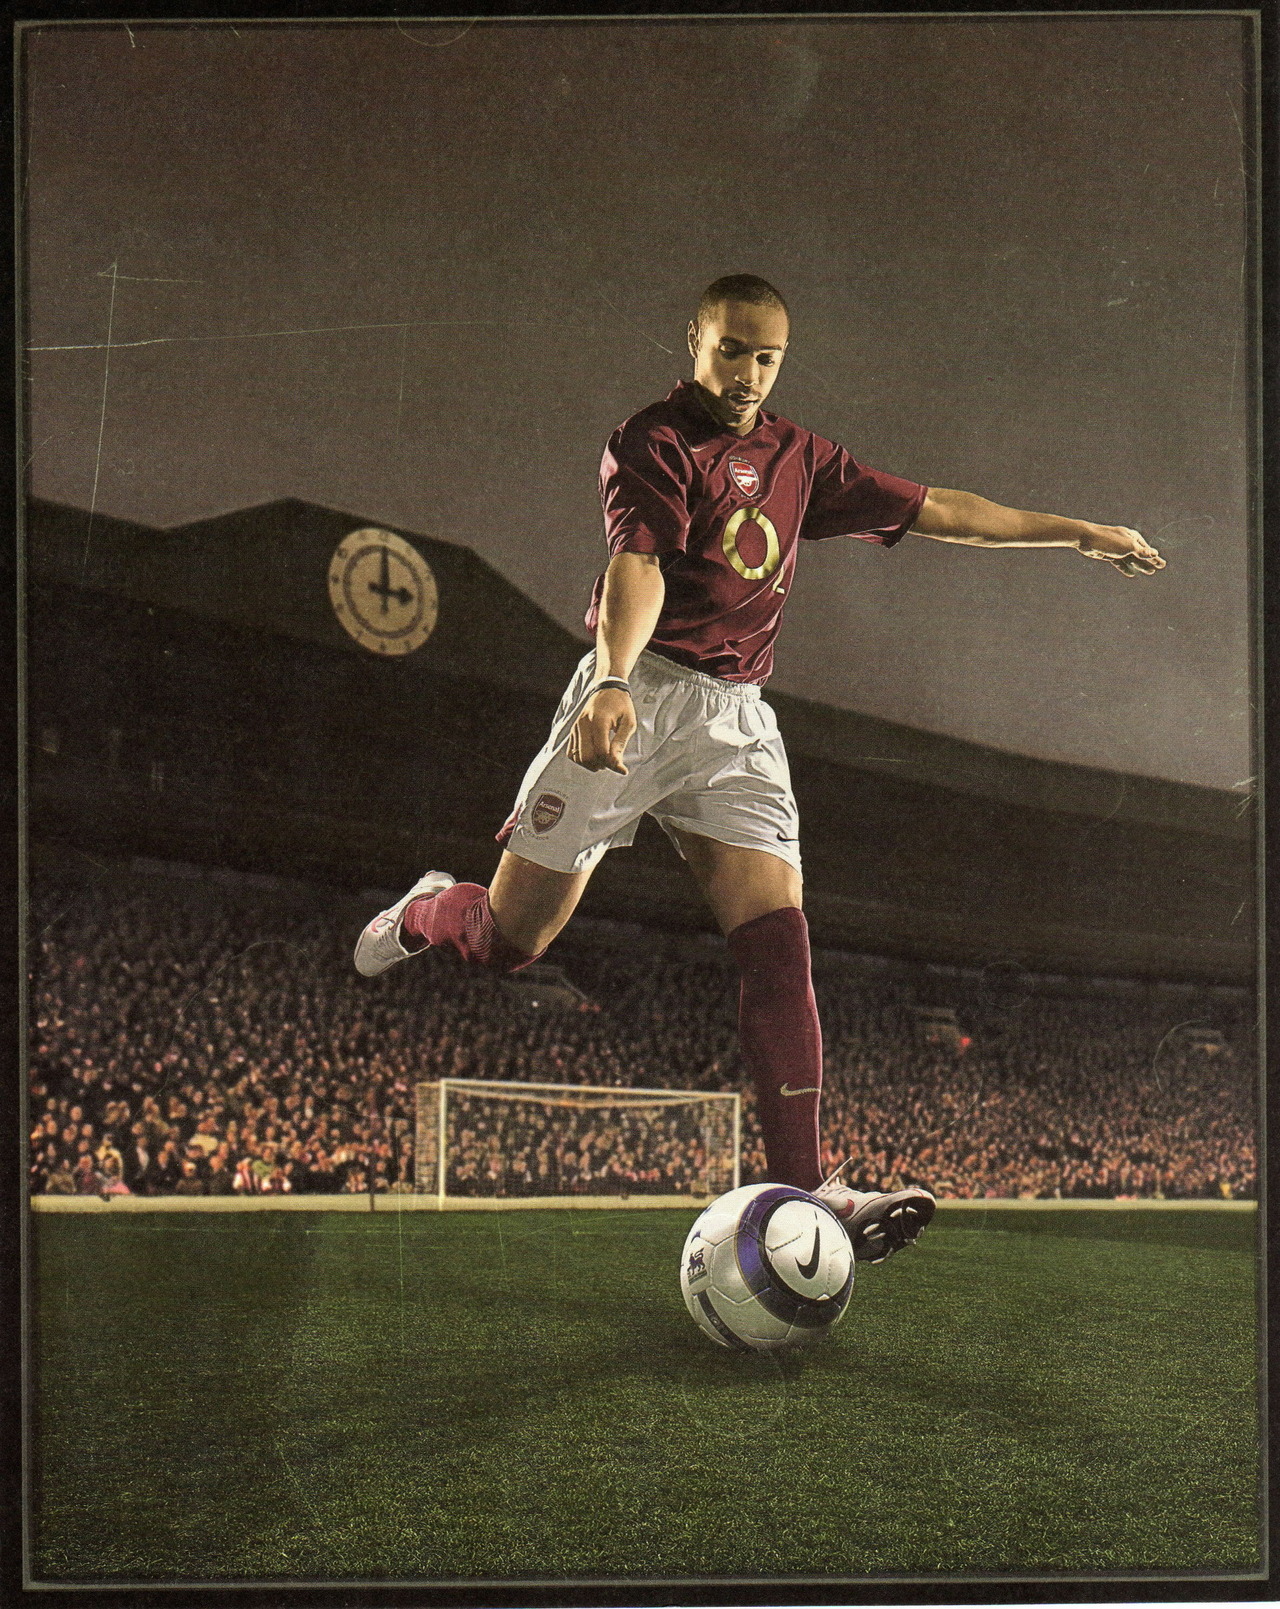 Unpredictable is Underrated: Appreciating Thierry Henry “ By Eric Beard
”
Some things - albeit in increasingly rare quantity - transcend time.
Some artists find ways to extend their craft, their respective careers, into moments that make others...